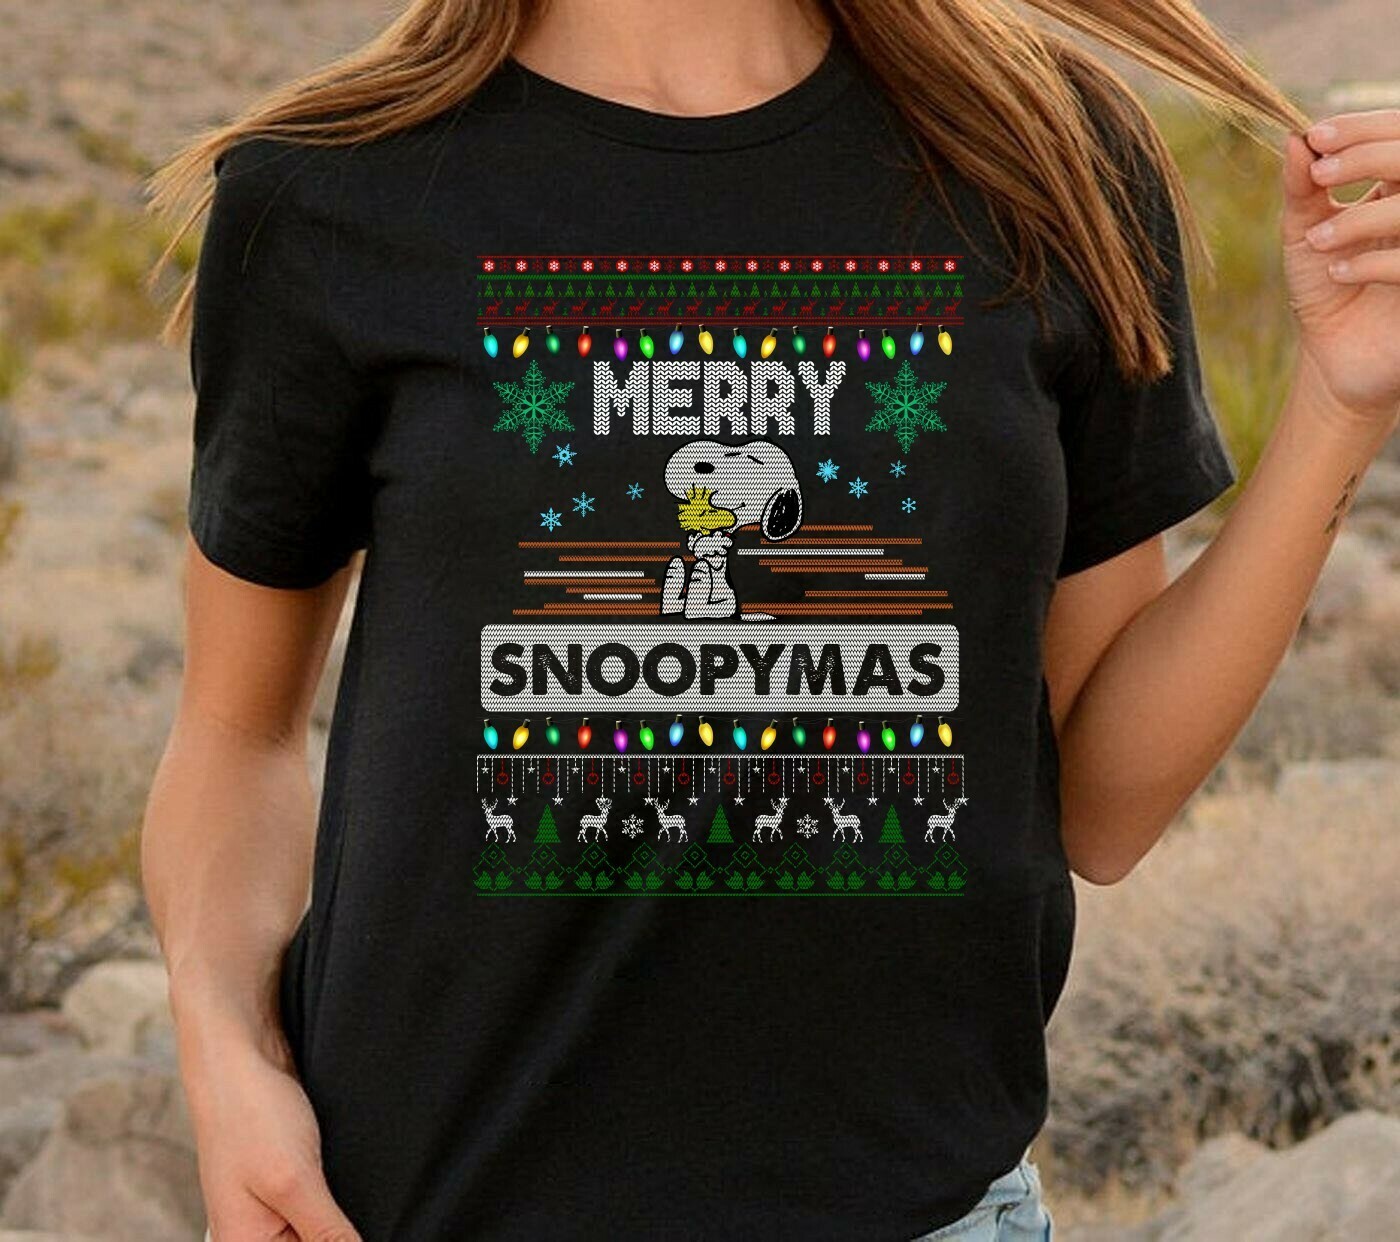 Merry Snoopymas Snoopy Lumberjack Buffalo Plaid Snoopy And Friends Christmas Snoopy Woodstock Charlie Brown Gifts Noel Family Party T Shirt Long Sleeve Sweatshirt Hoodie Jolly Family Gifts